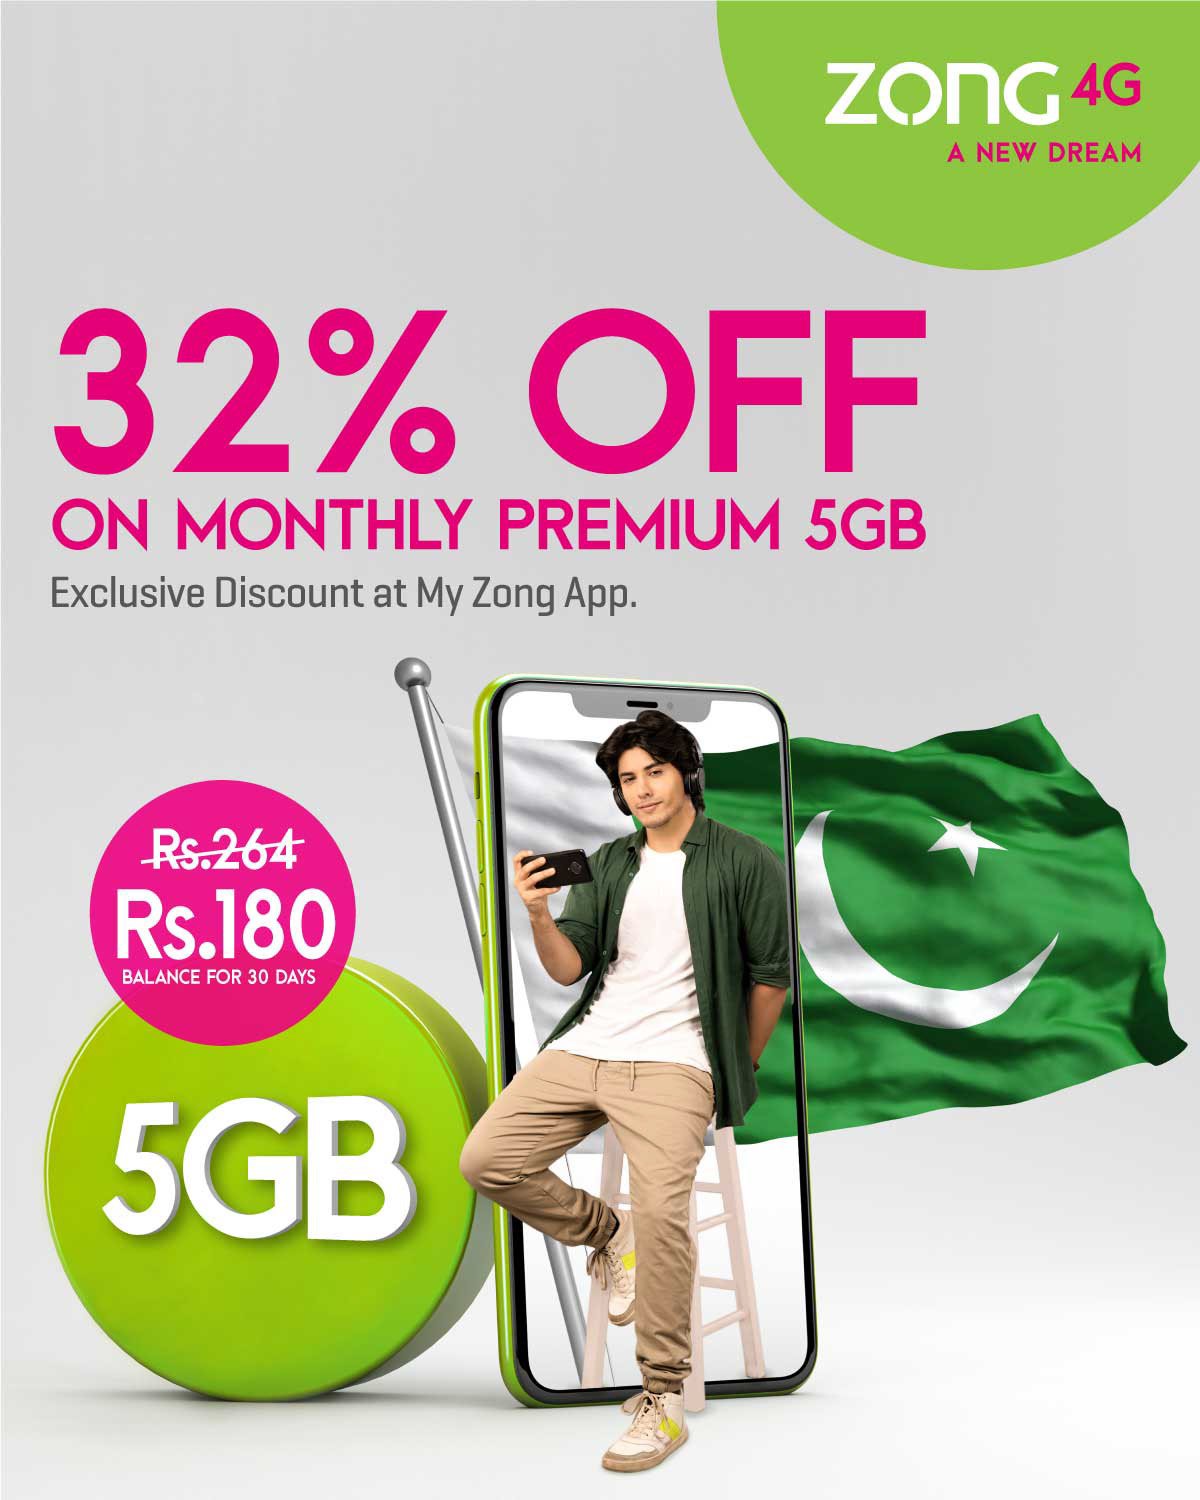 14 august 32% off 5GB A NEW DREAm discount graphic design  independence day Monthly premium my zong app zong